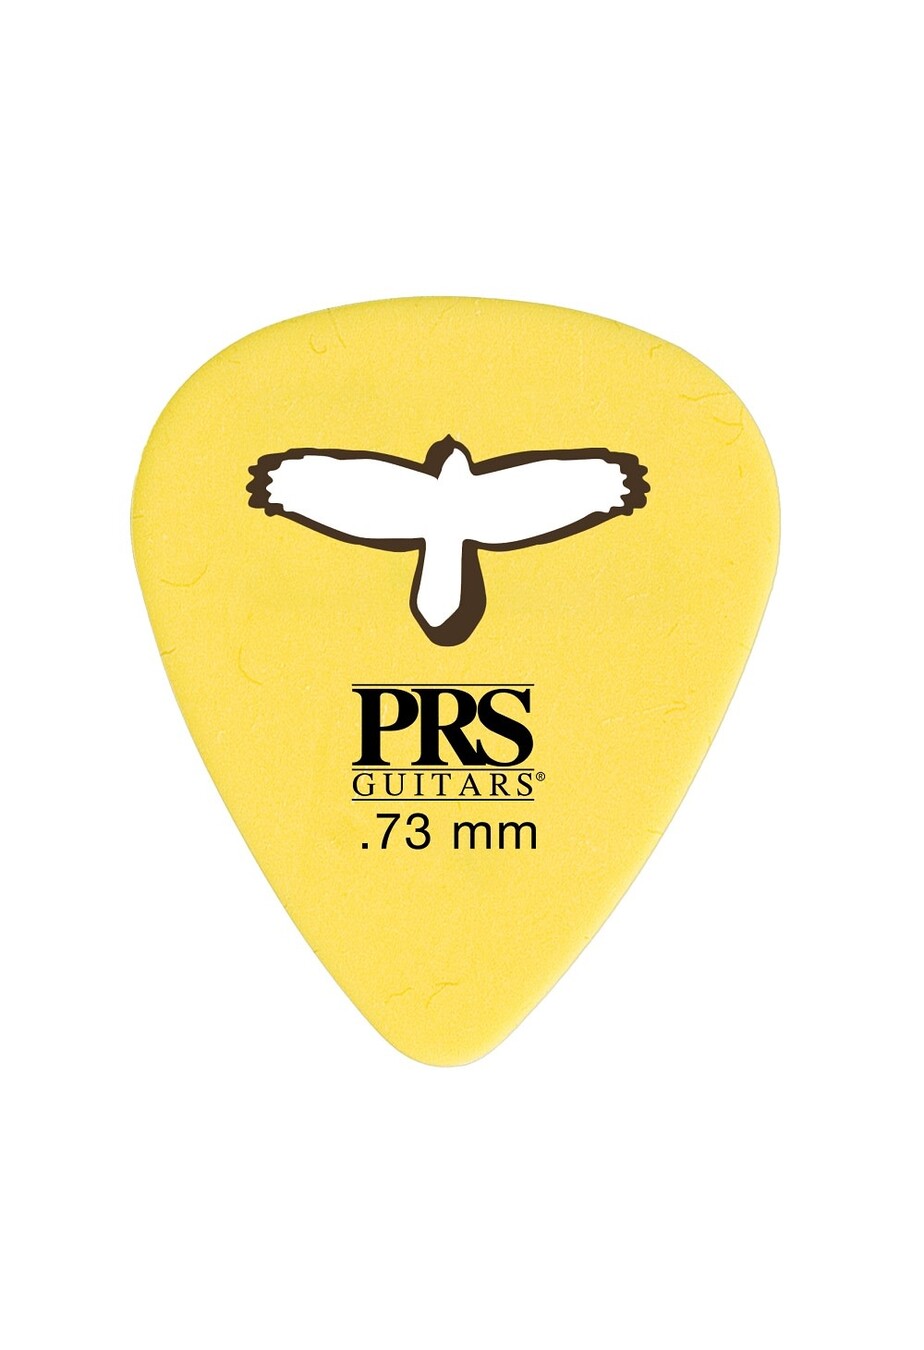 PRS Guitars Delrin "Punch" Picks - Yellow .73mm - 12 Pack